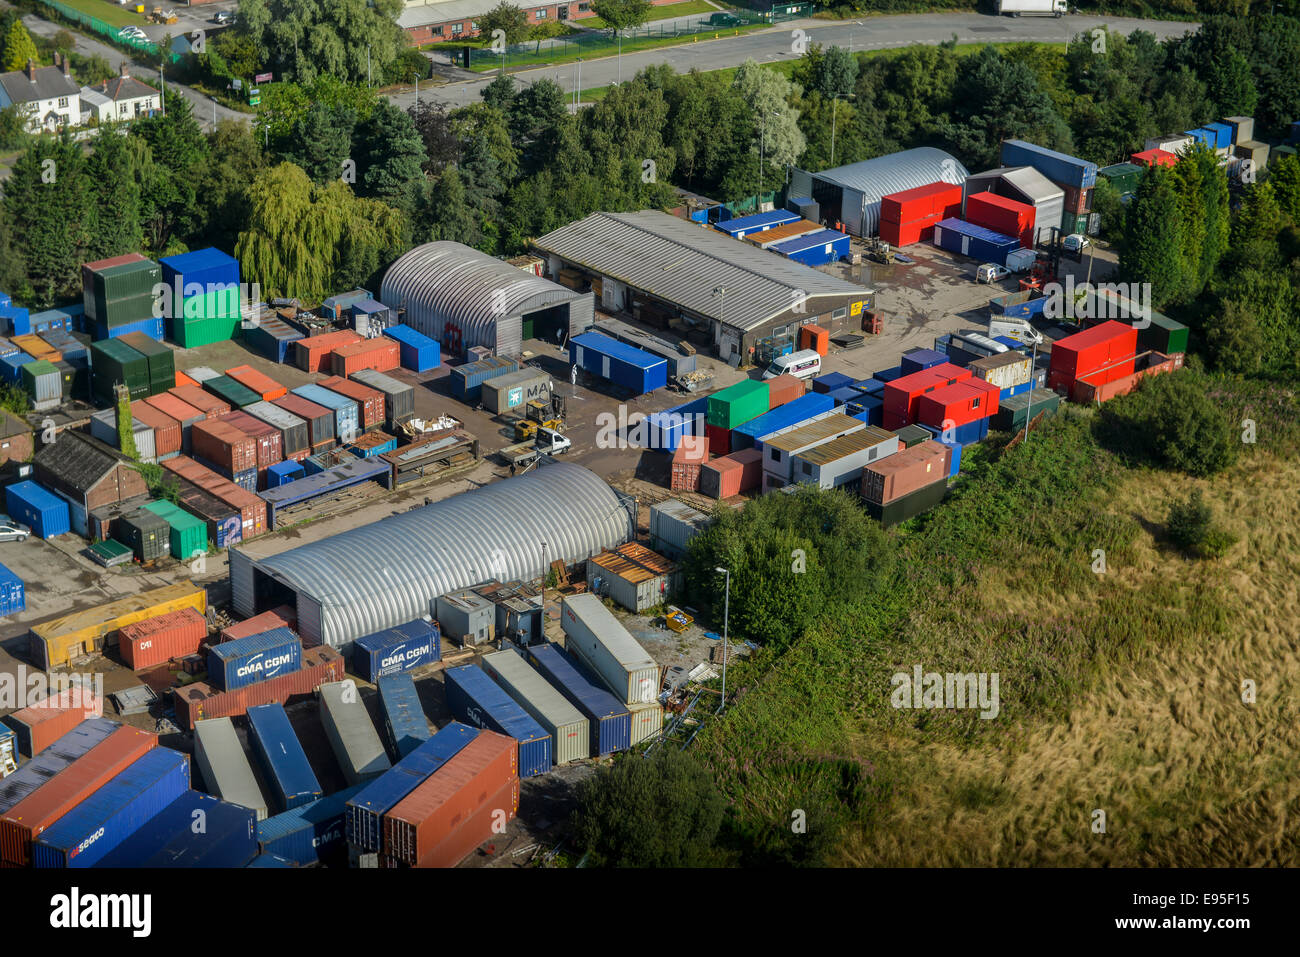 An aerial view of a light industrial unit with transport containers stacked up. Stock Photo